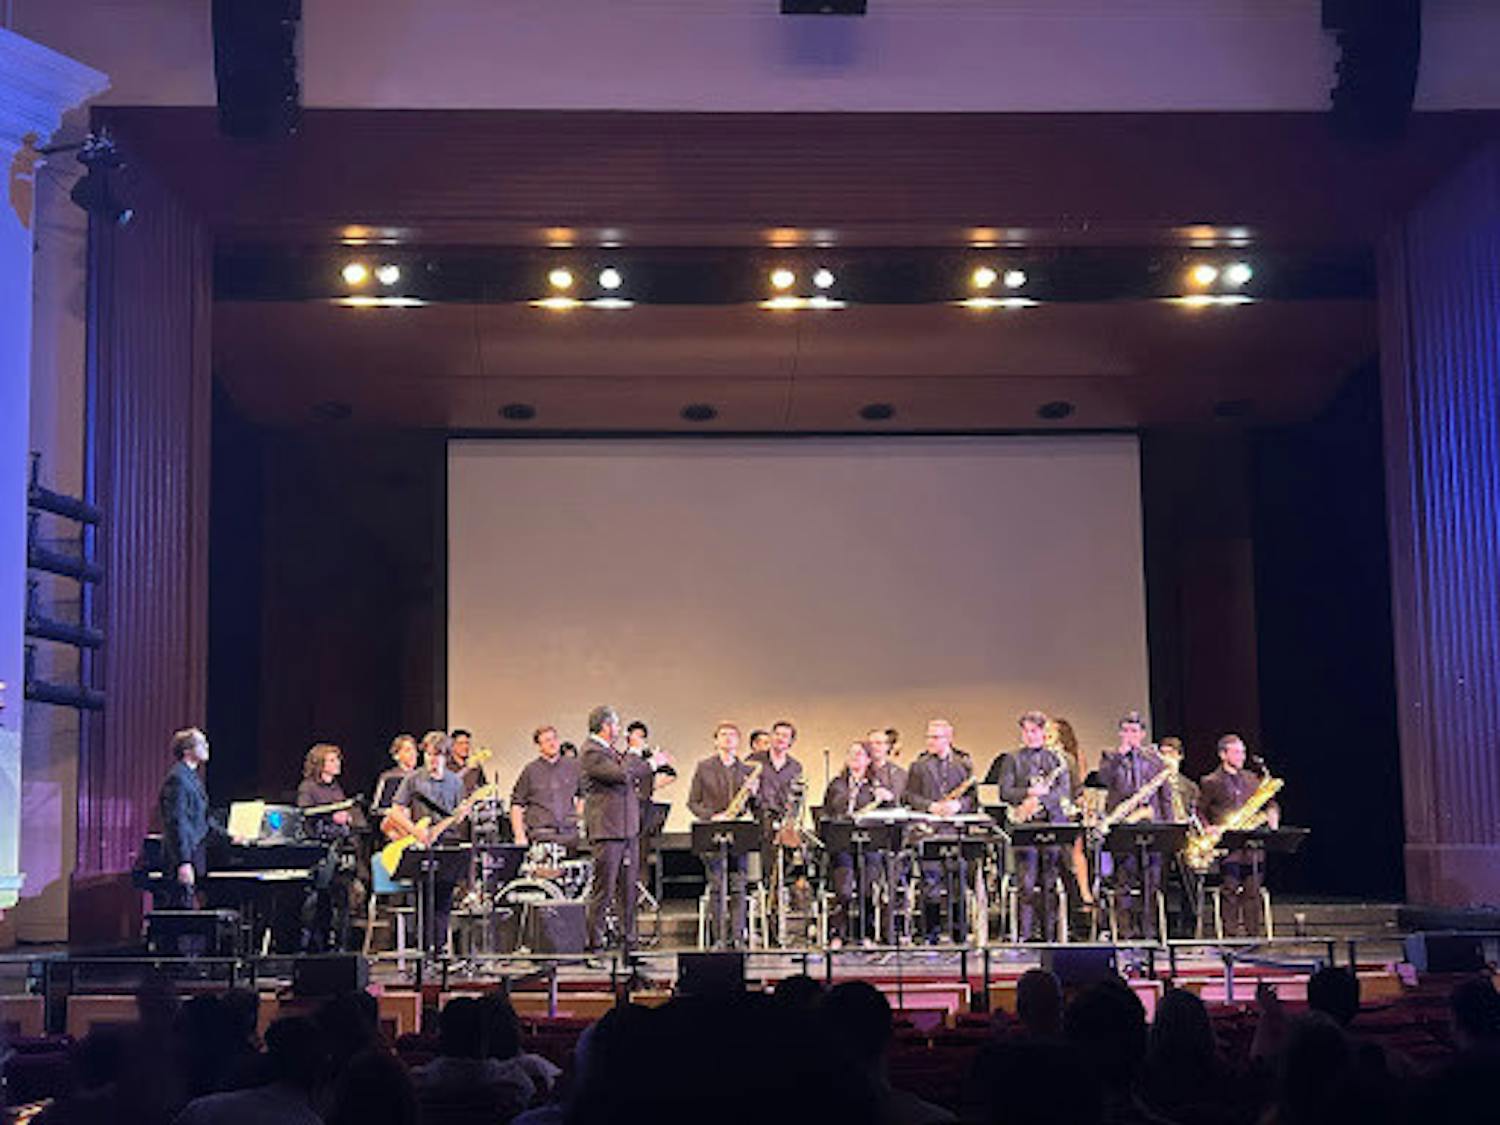 The Nov. 18 performance was held in Kendall Hall and consisted of 11 pieces (Photo Courtesy of Jenna Rittman / Correspondent).